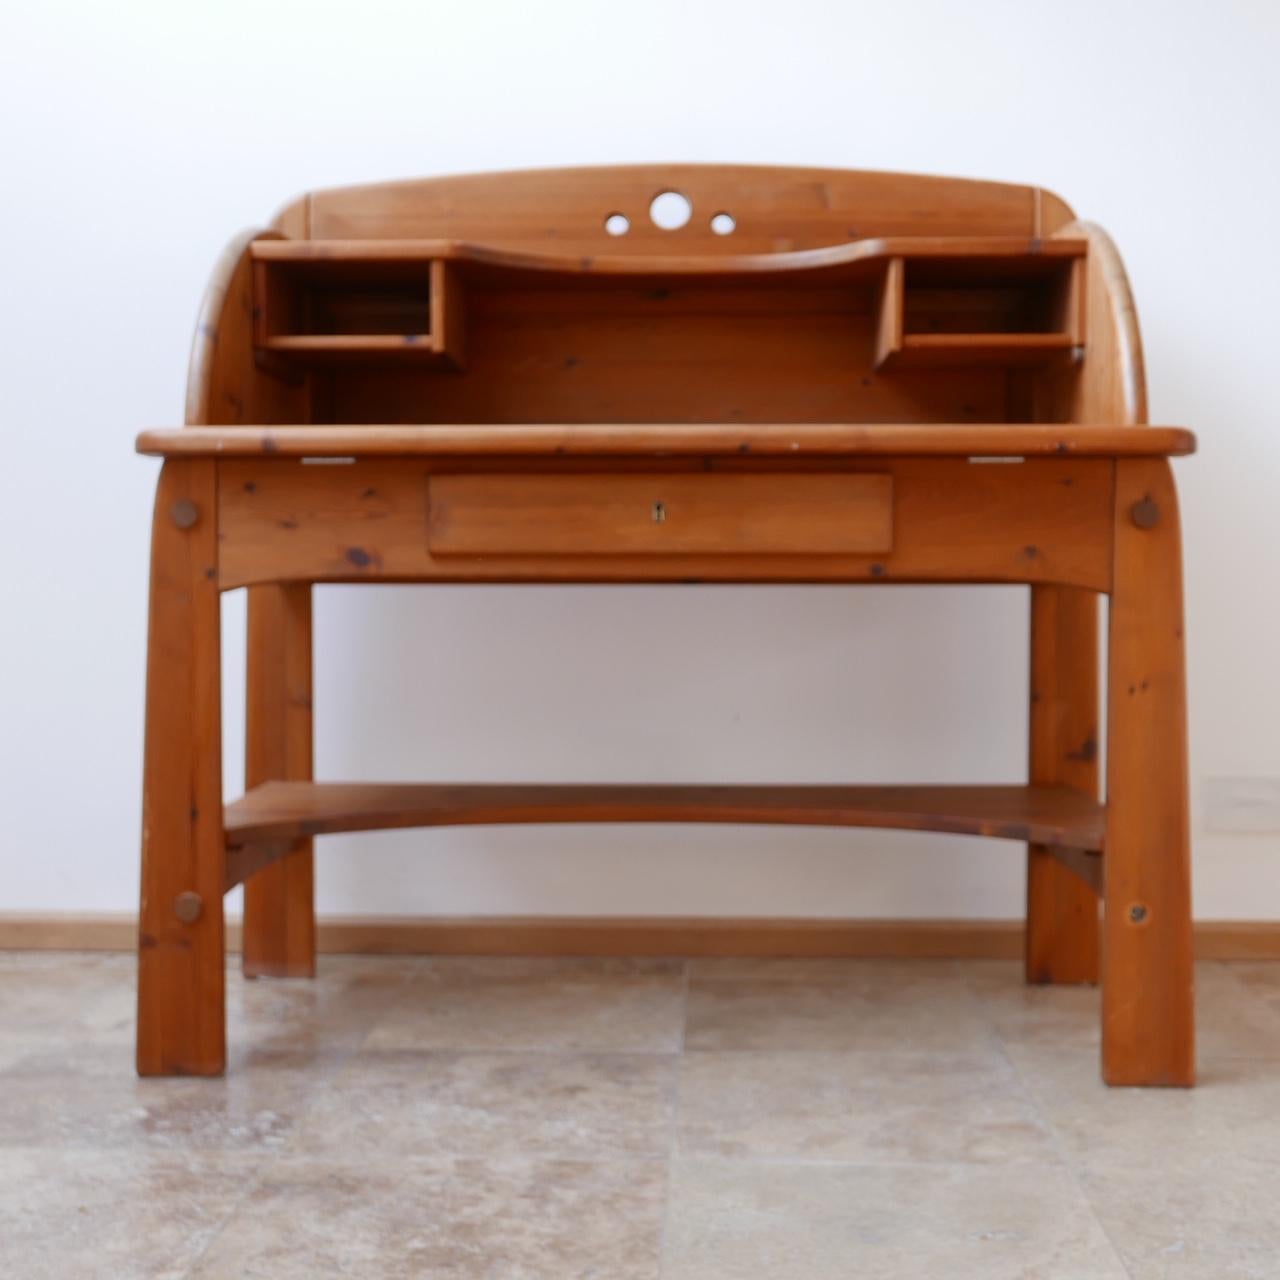 An unusual desk formed from pine with matching chair.

In the manner of Rainer Daumiller crossed with Gilbert Marklund.

Likely Swedish in origin.

The desk hides two secret drawers that pop down with a hidden catch making it ideal to hide